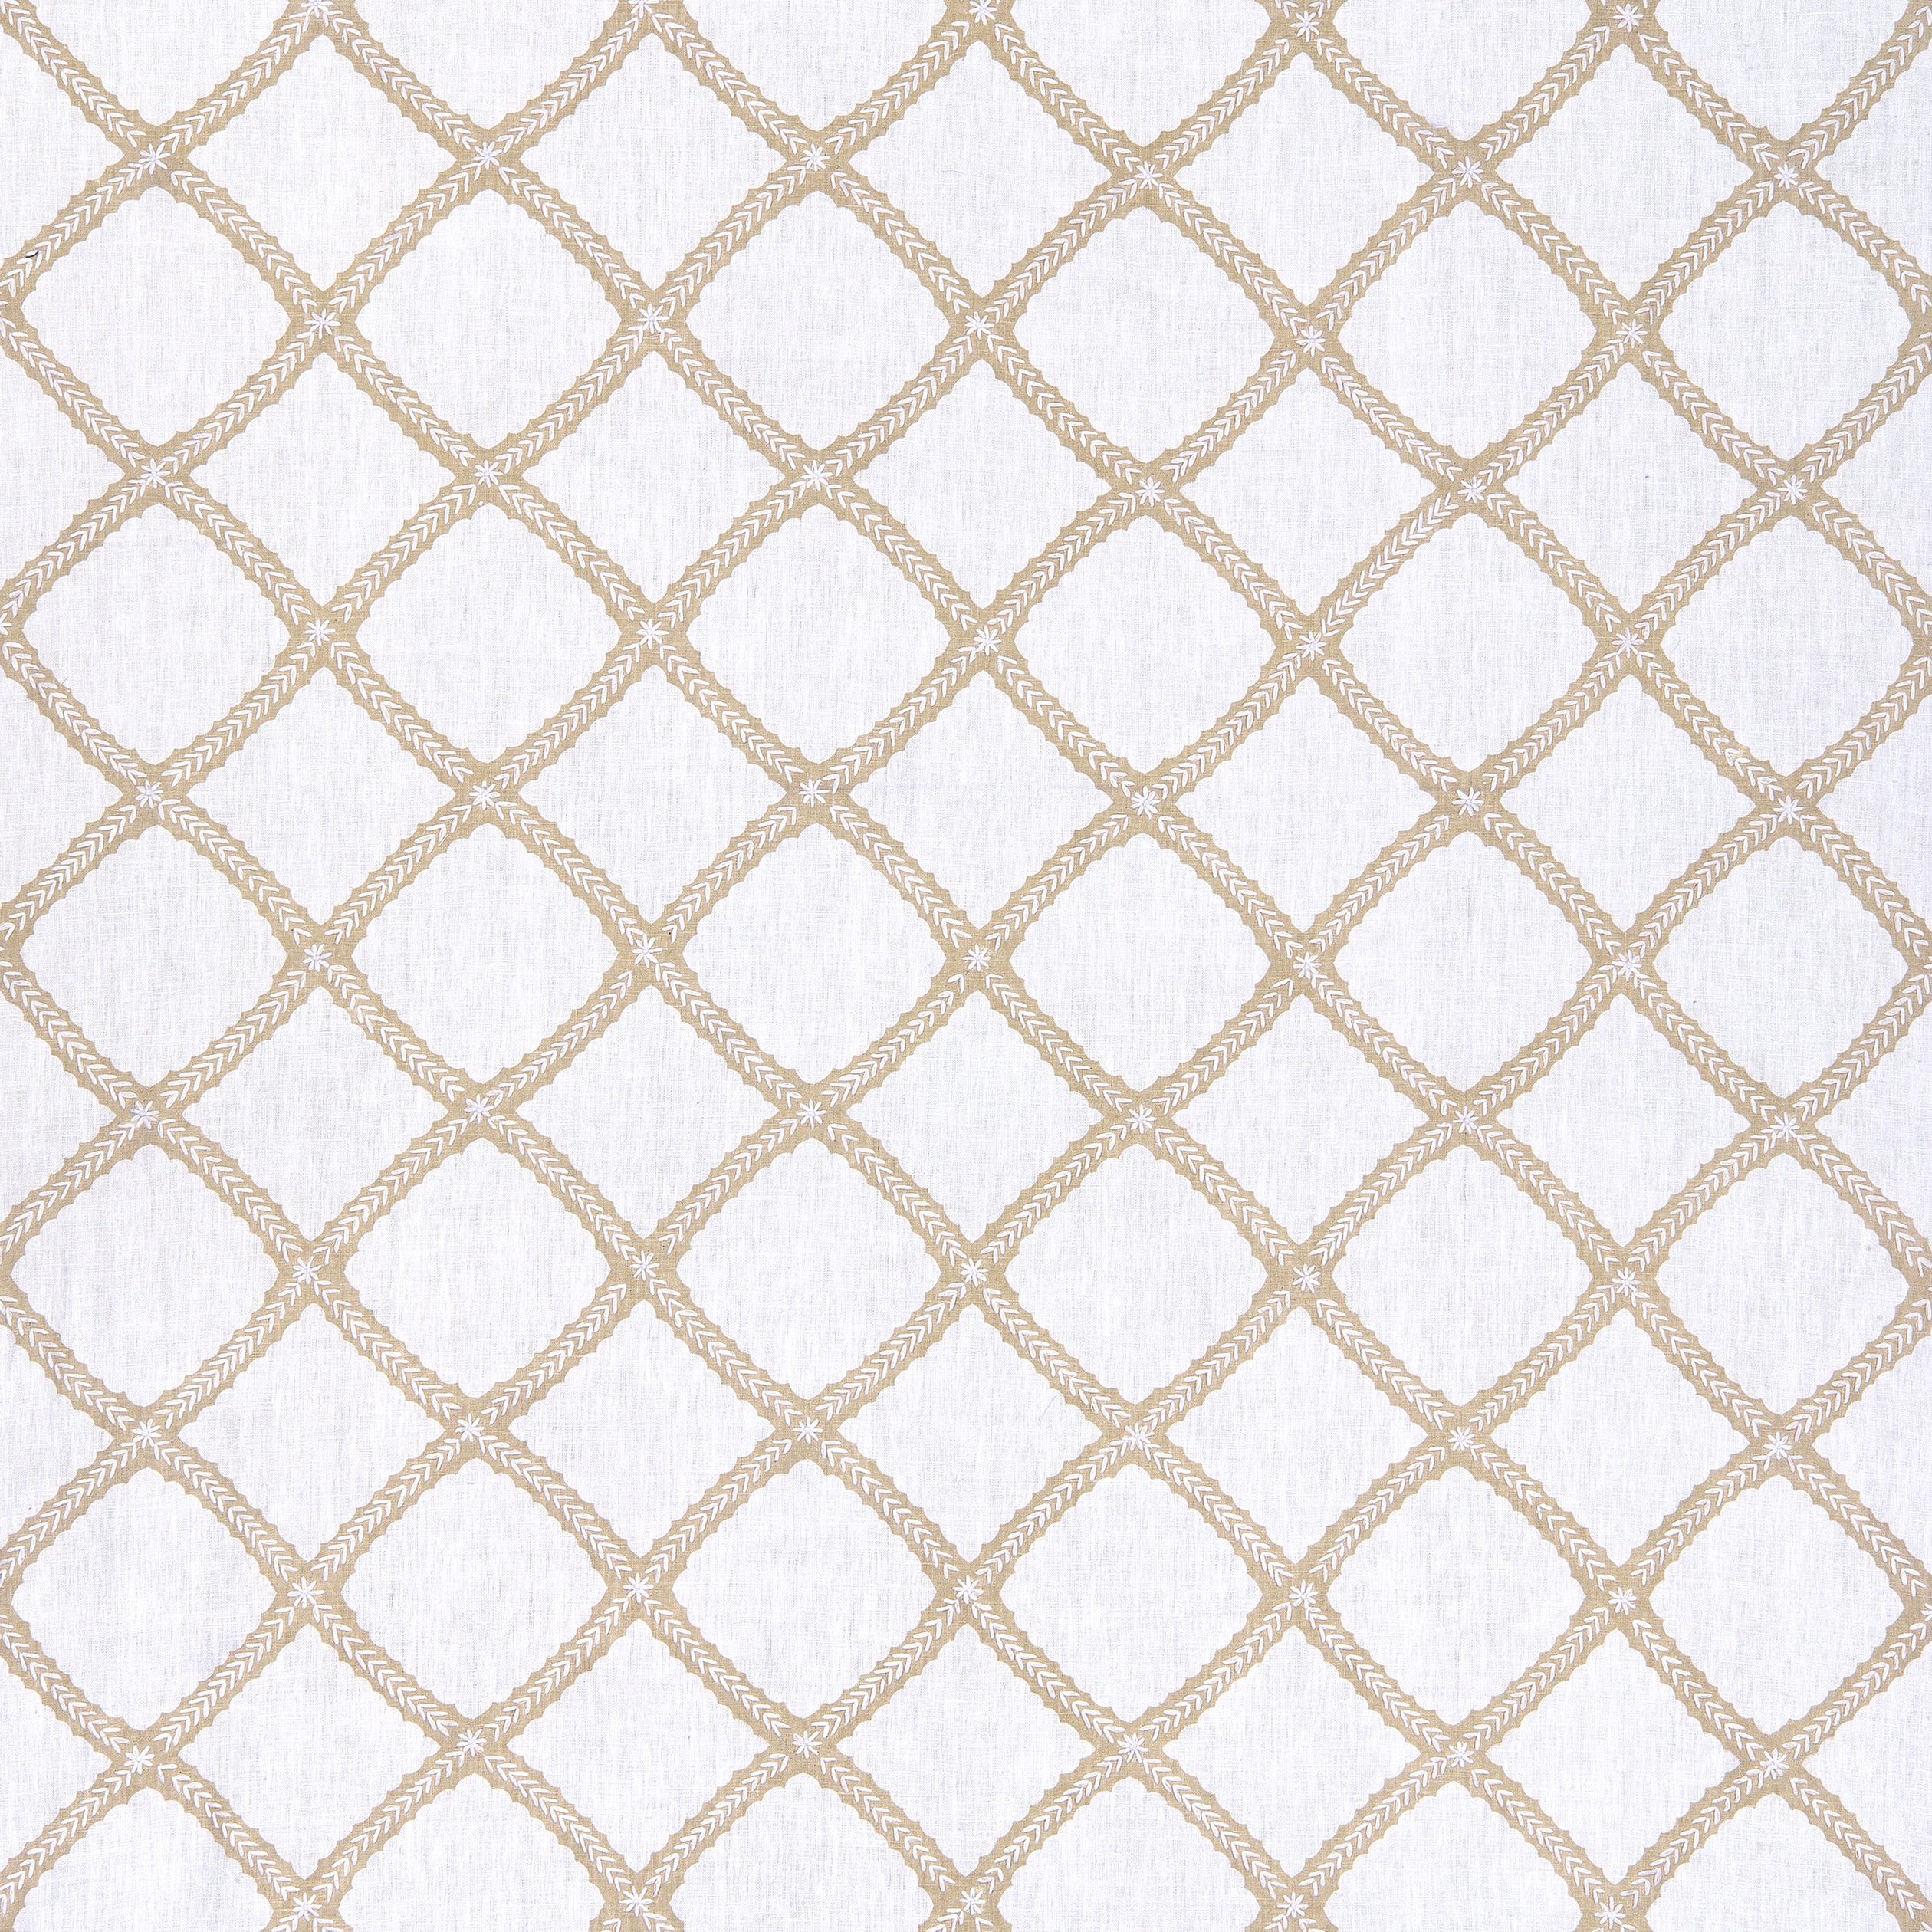 Majuli Embroidery fabric in beige on white color - pattern number W788705 - by Thibaut in the Trade Routes collection